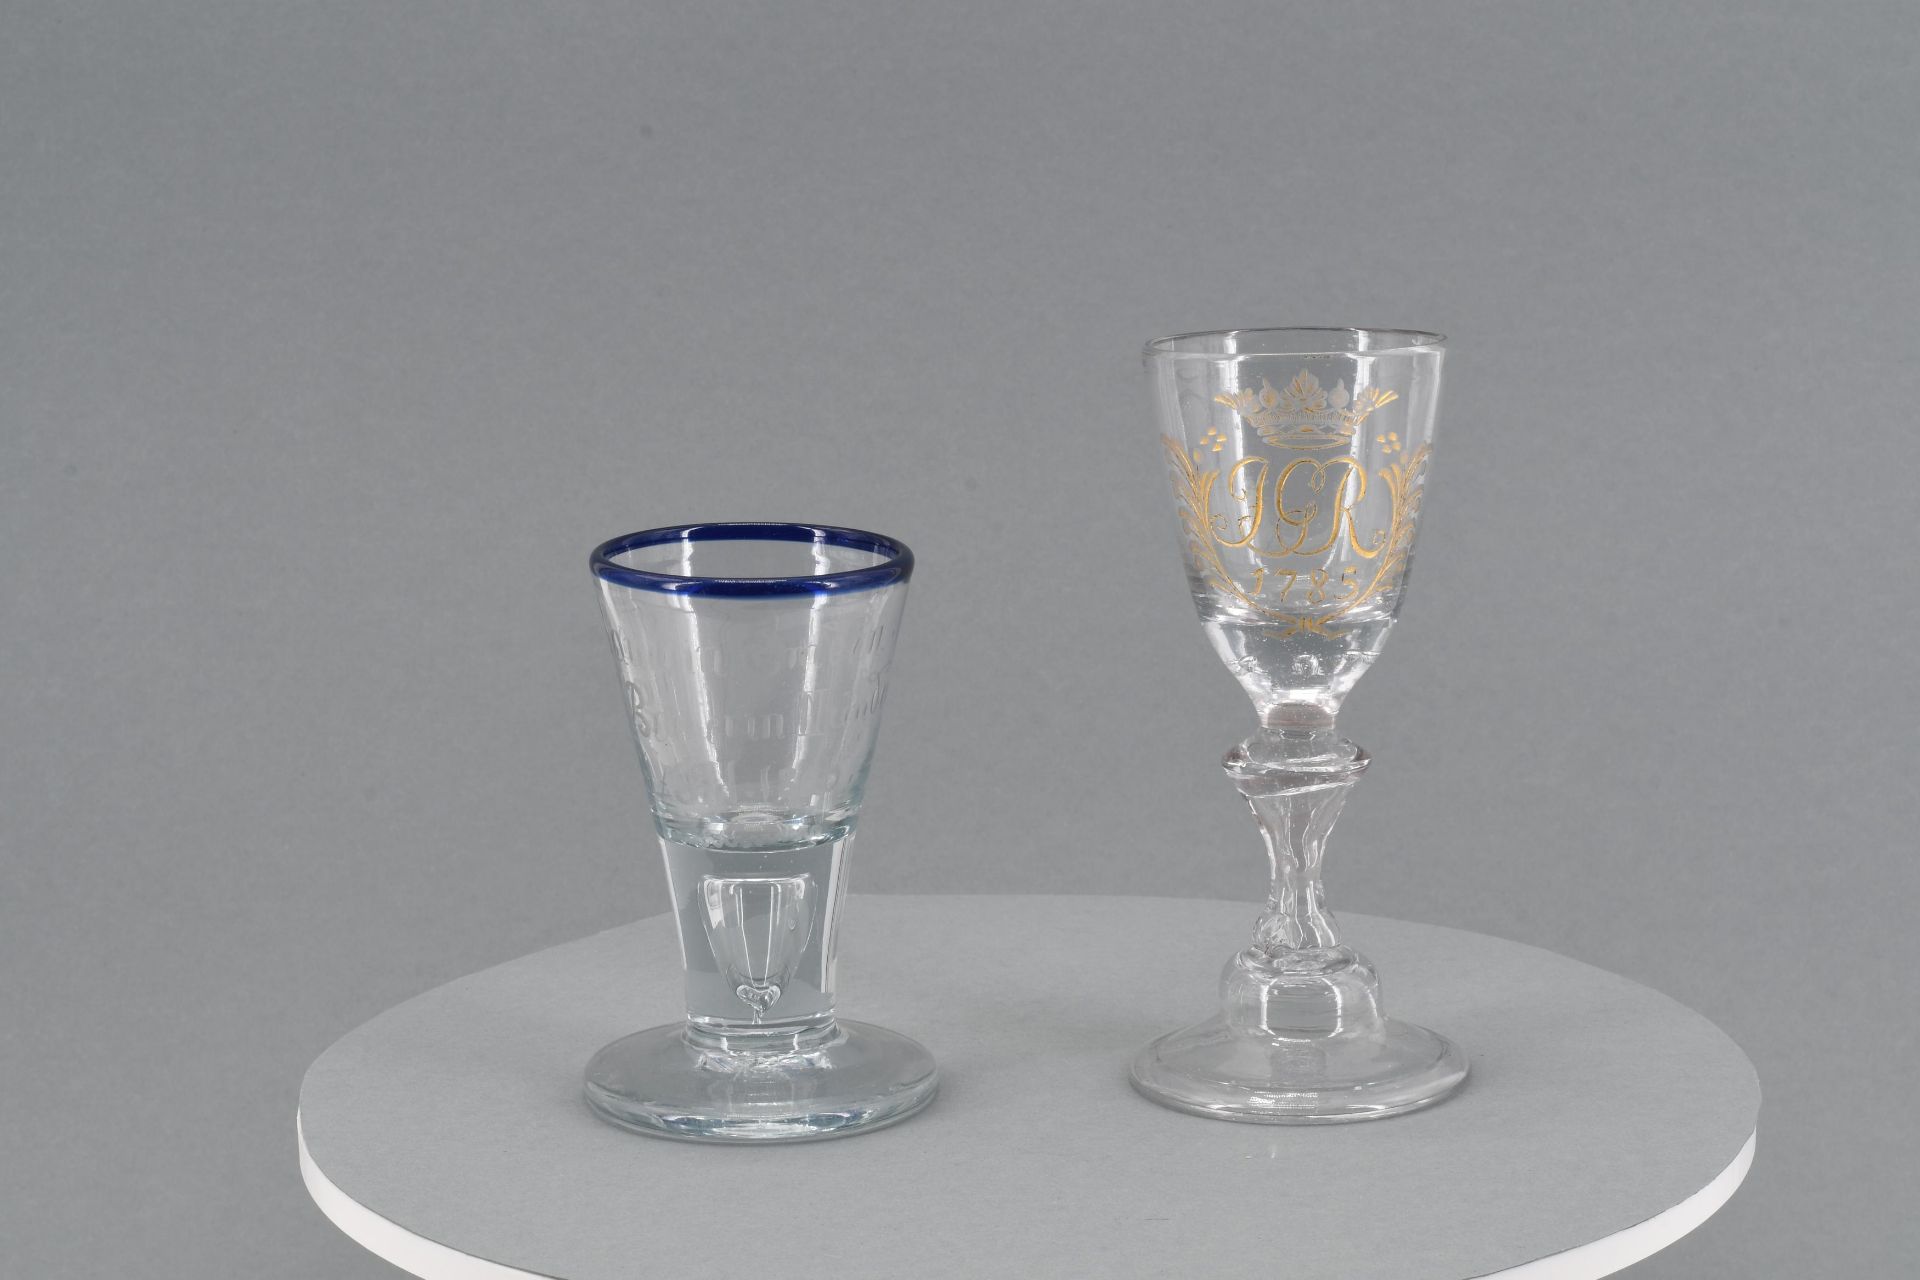 Goblet with monogram and schnapps glass with blue rim - Image 2 of 15